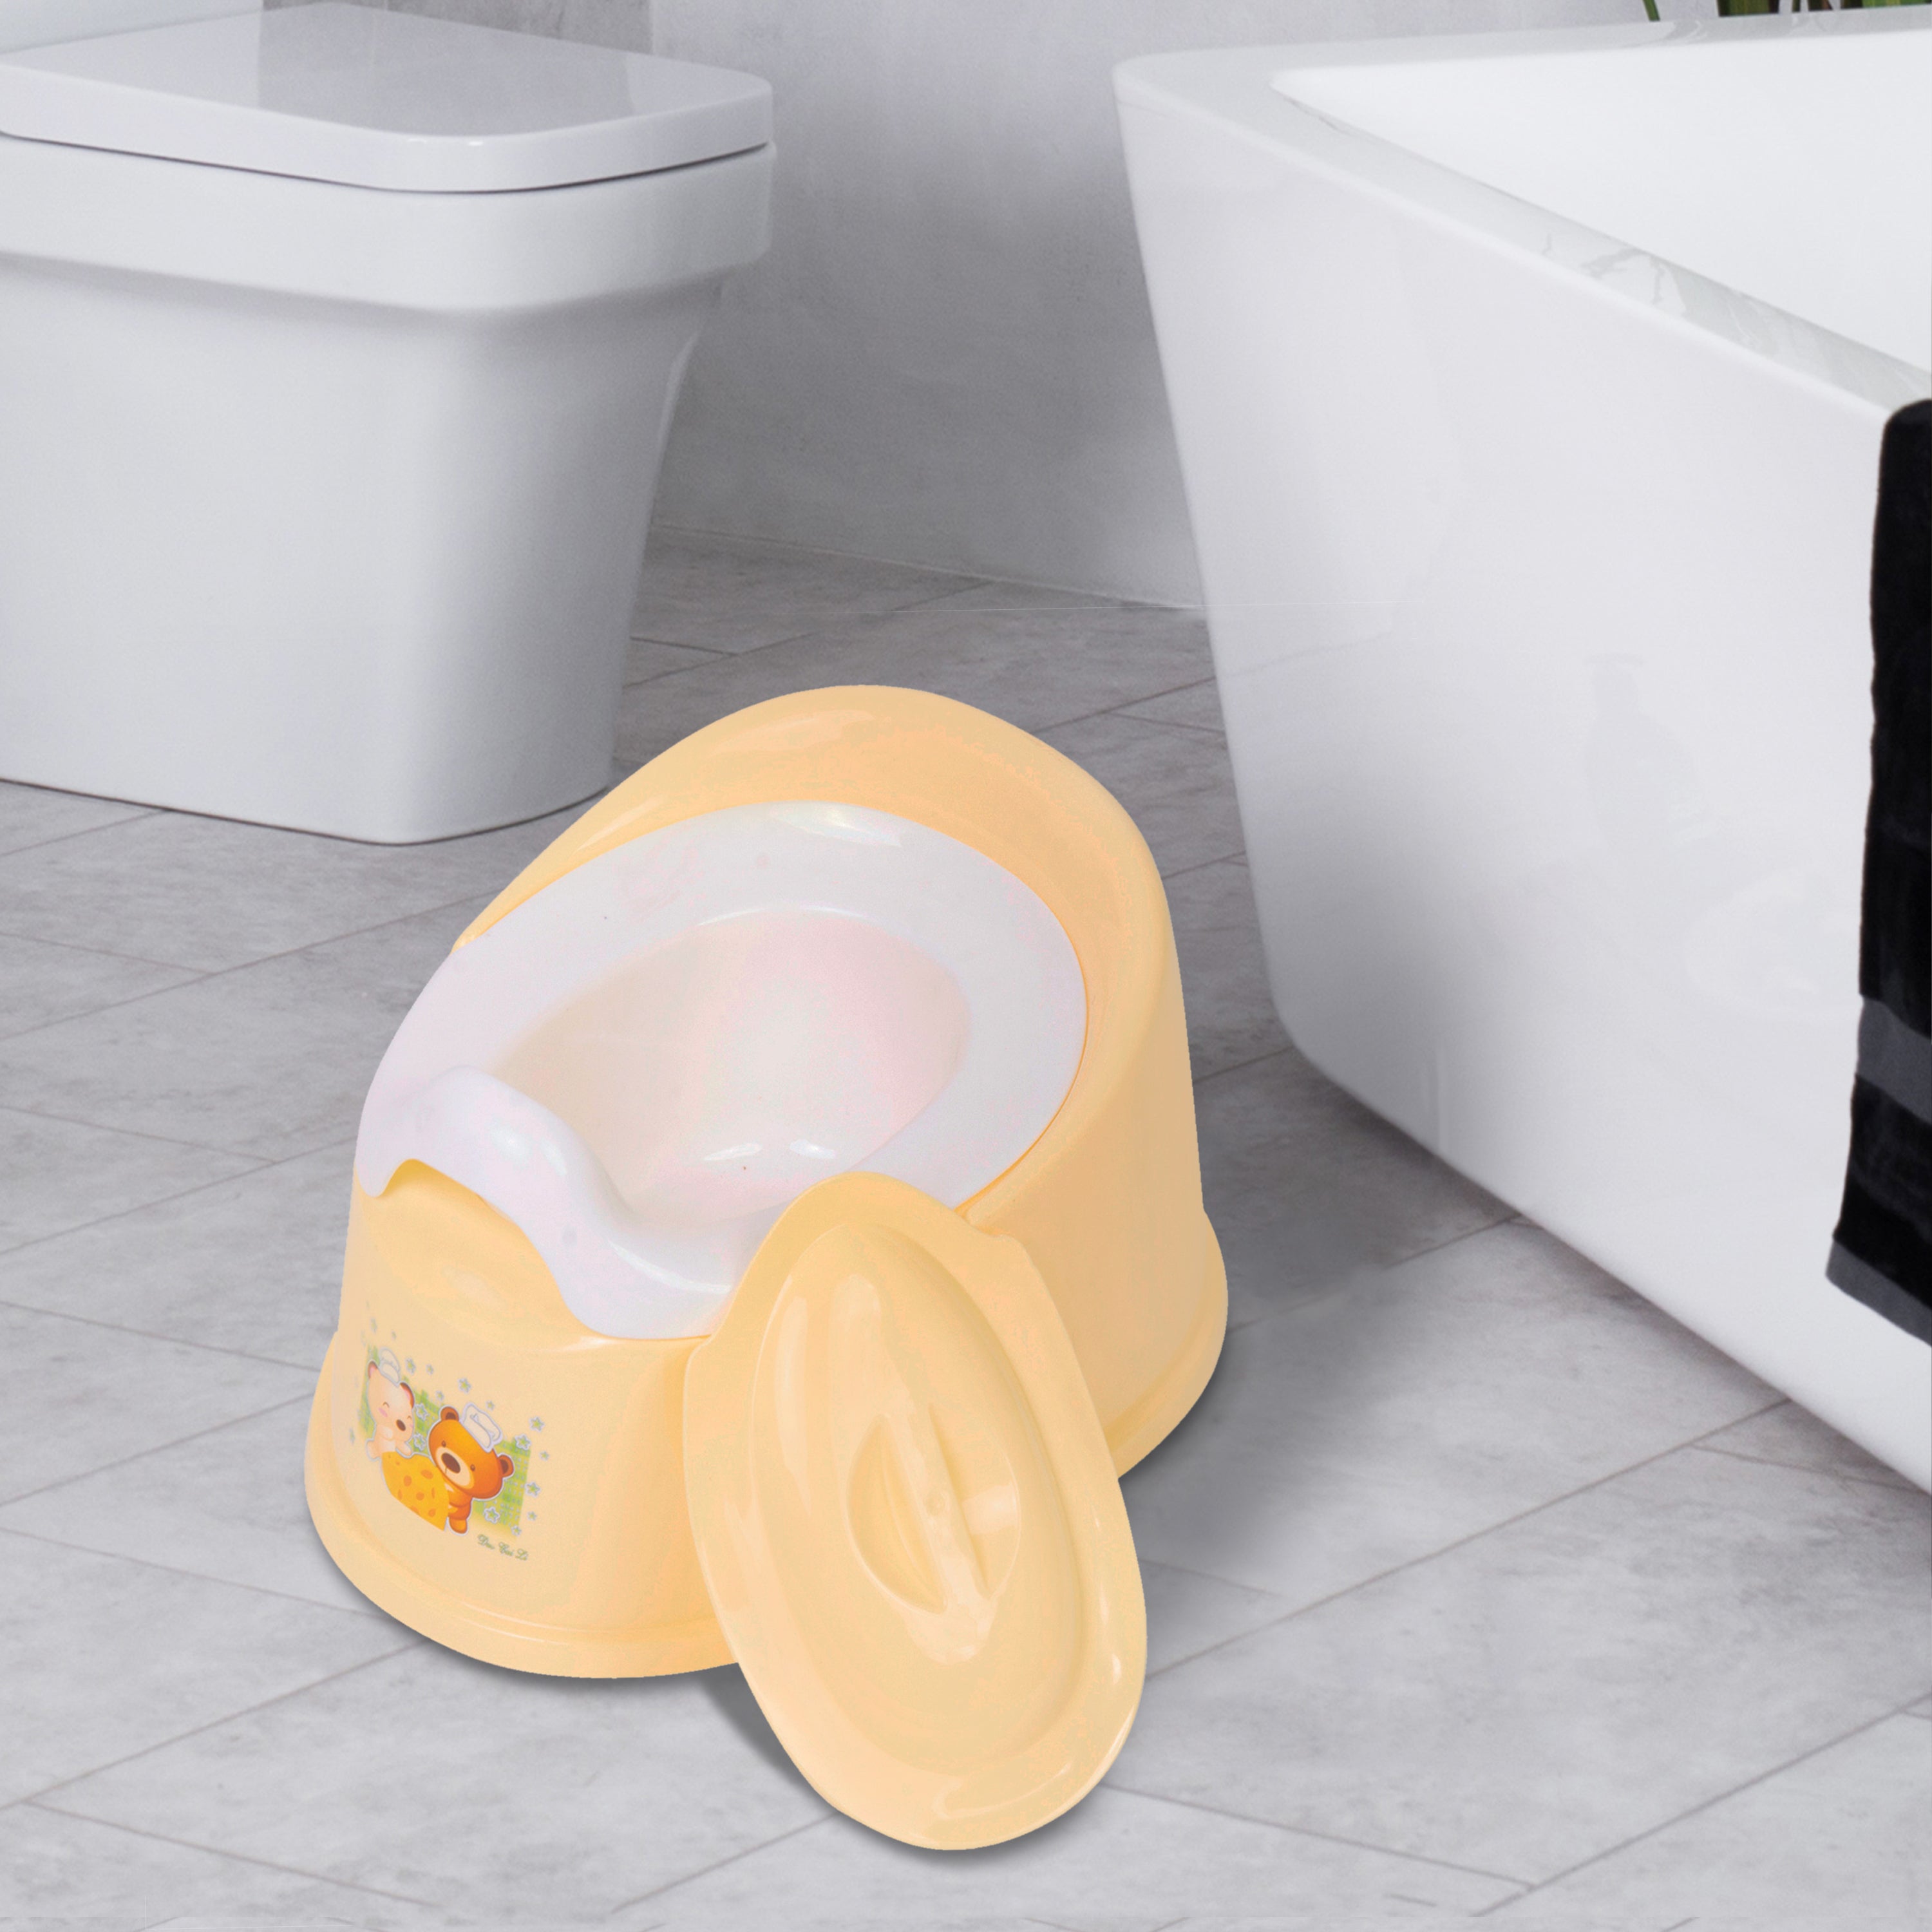 Baby Moo Potty Chair Removable Tray For Toilet Training Yellow